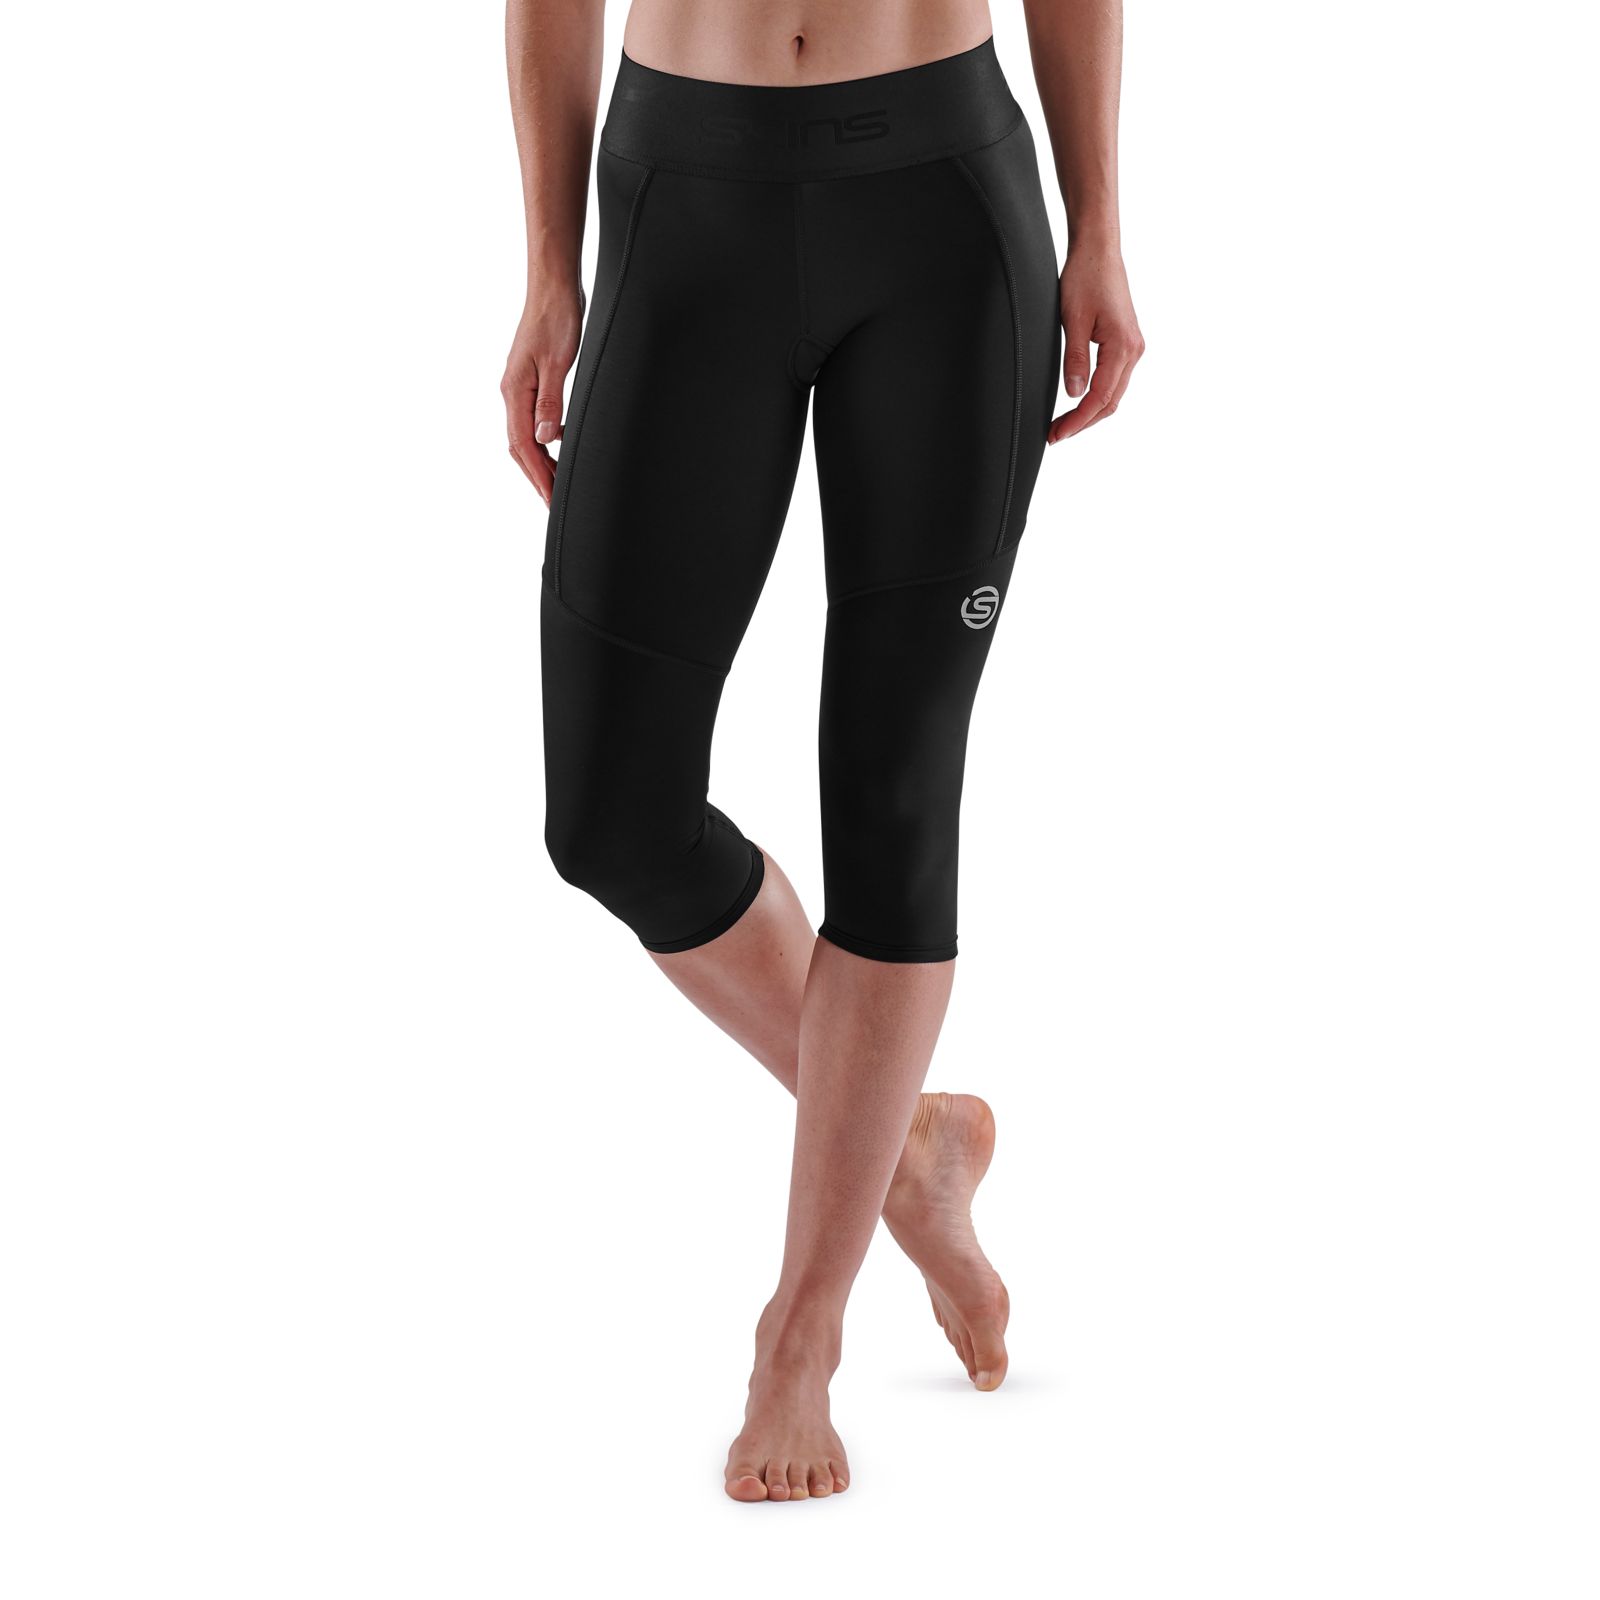 SKINS Women's A400 Compression Long Tights - Black